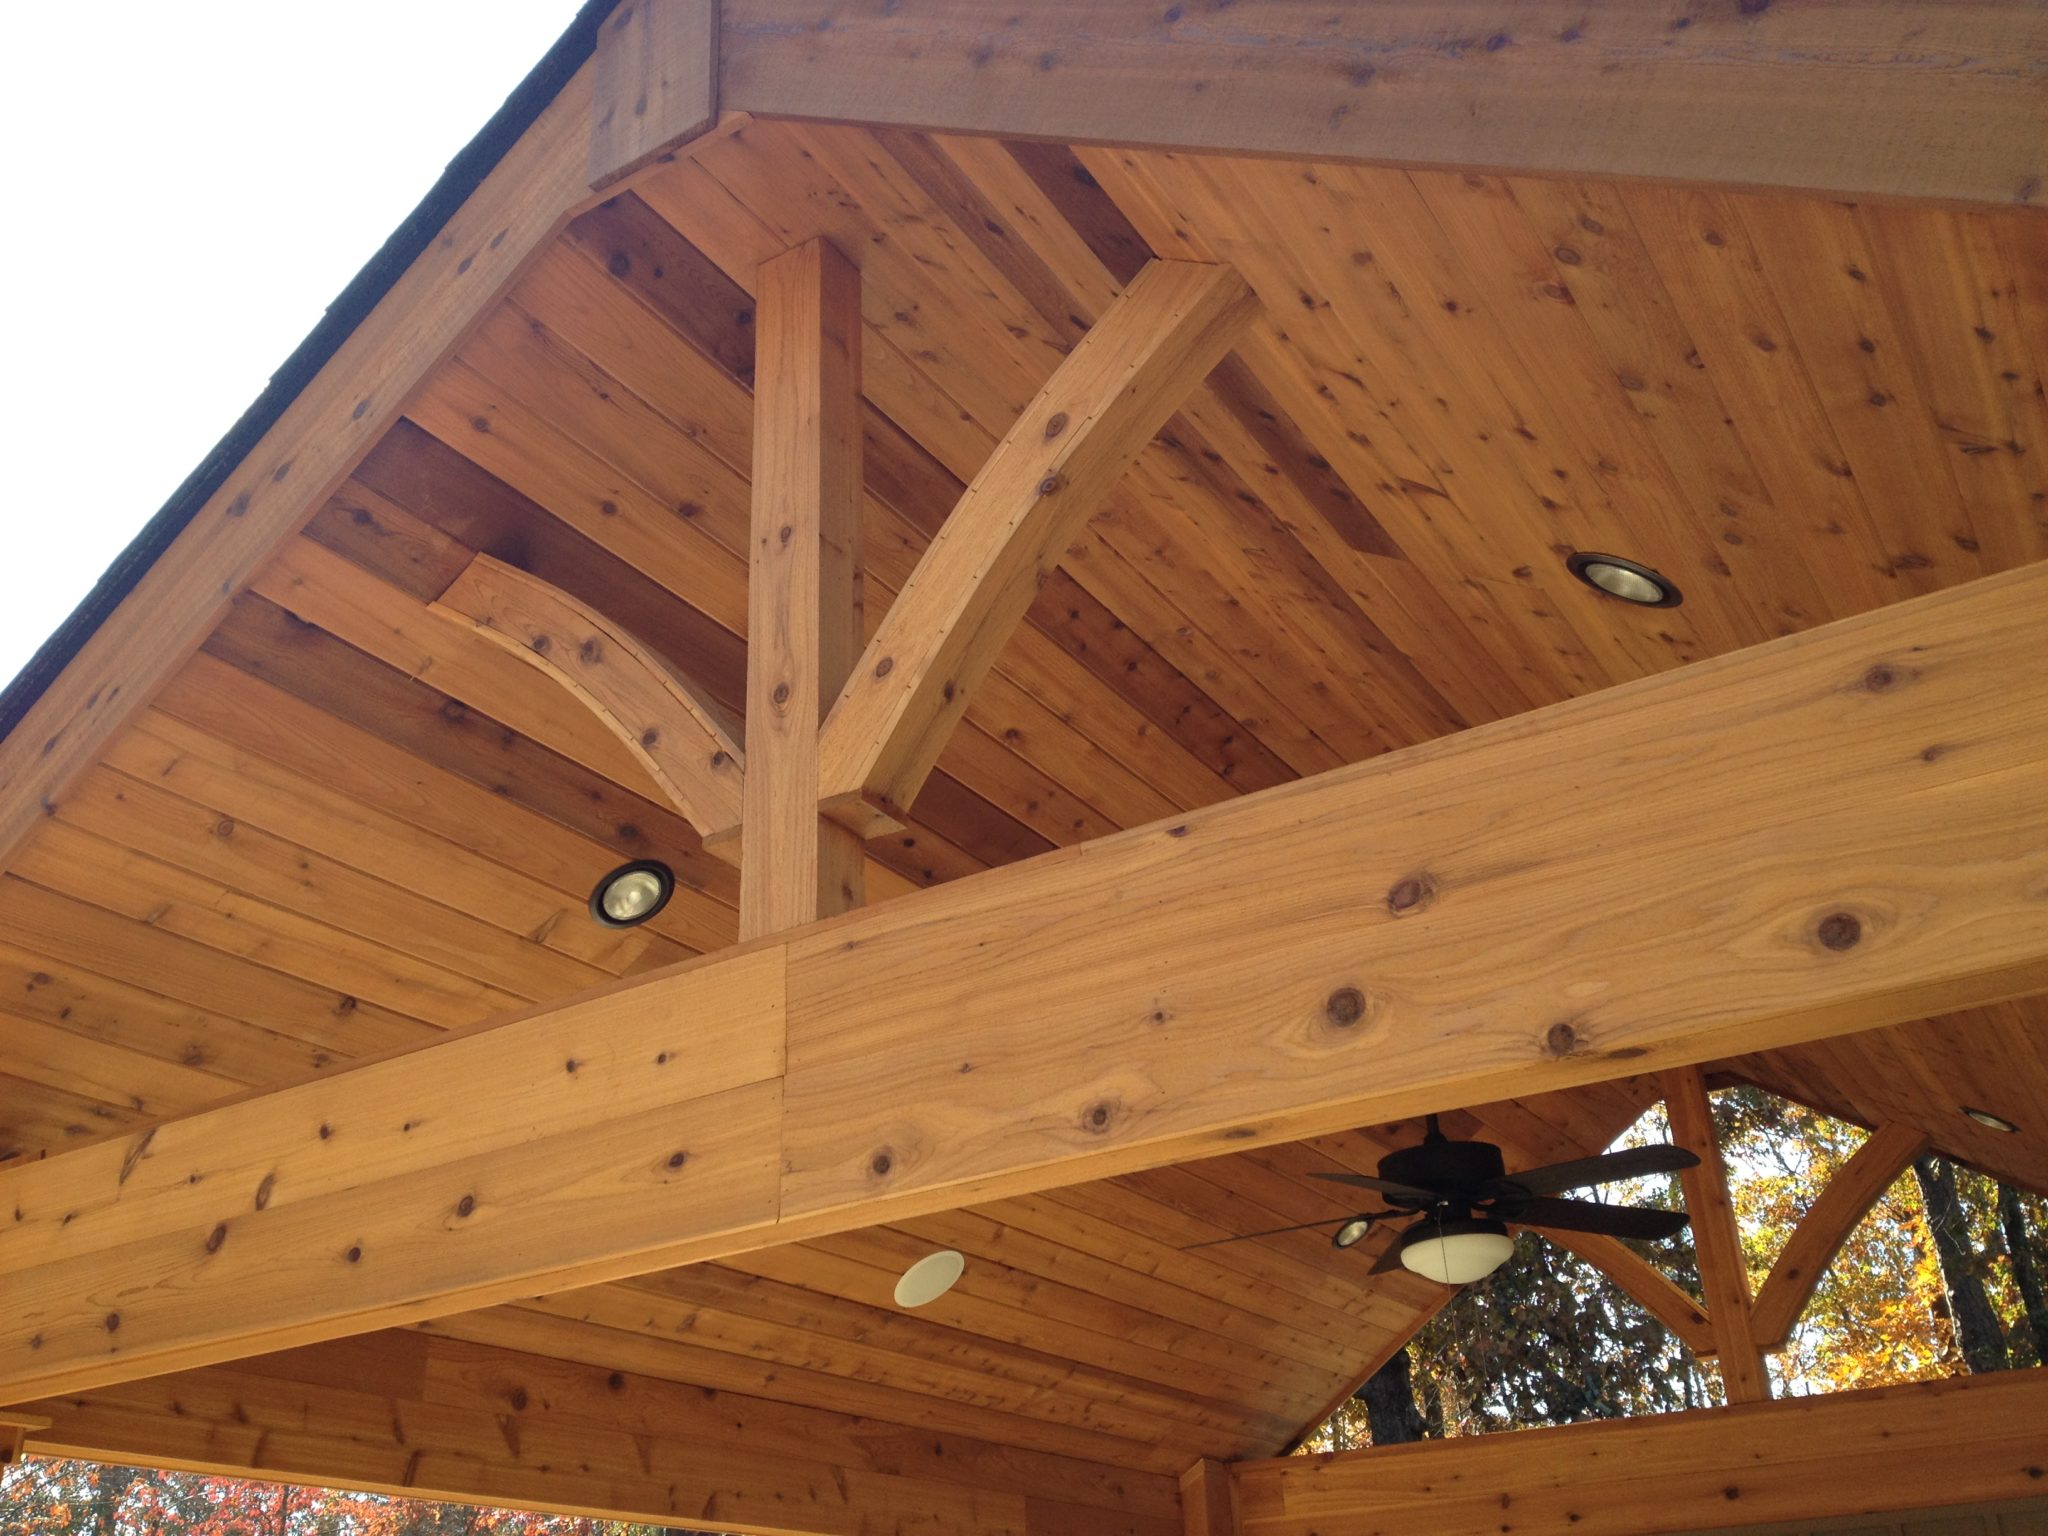 A beautifully crafted wood vaulted cabana providing a cozy retreat.